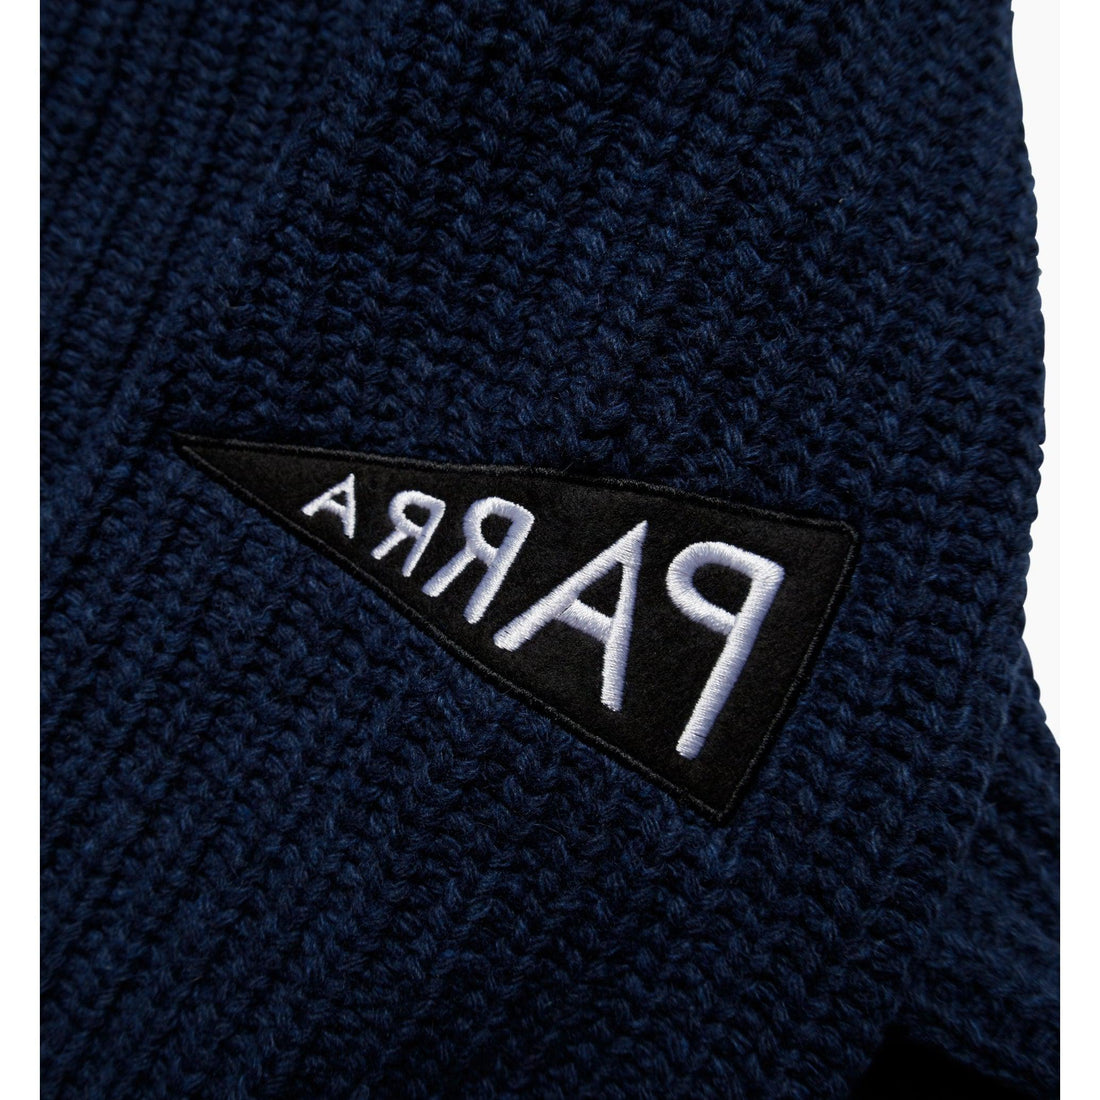 BY PARRA - MIRRORED FLAG LOGO KNITED PULLOVER - BLUE